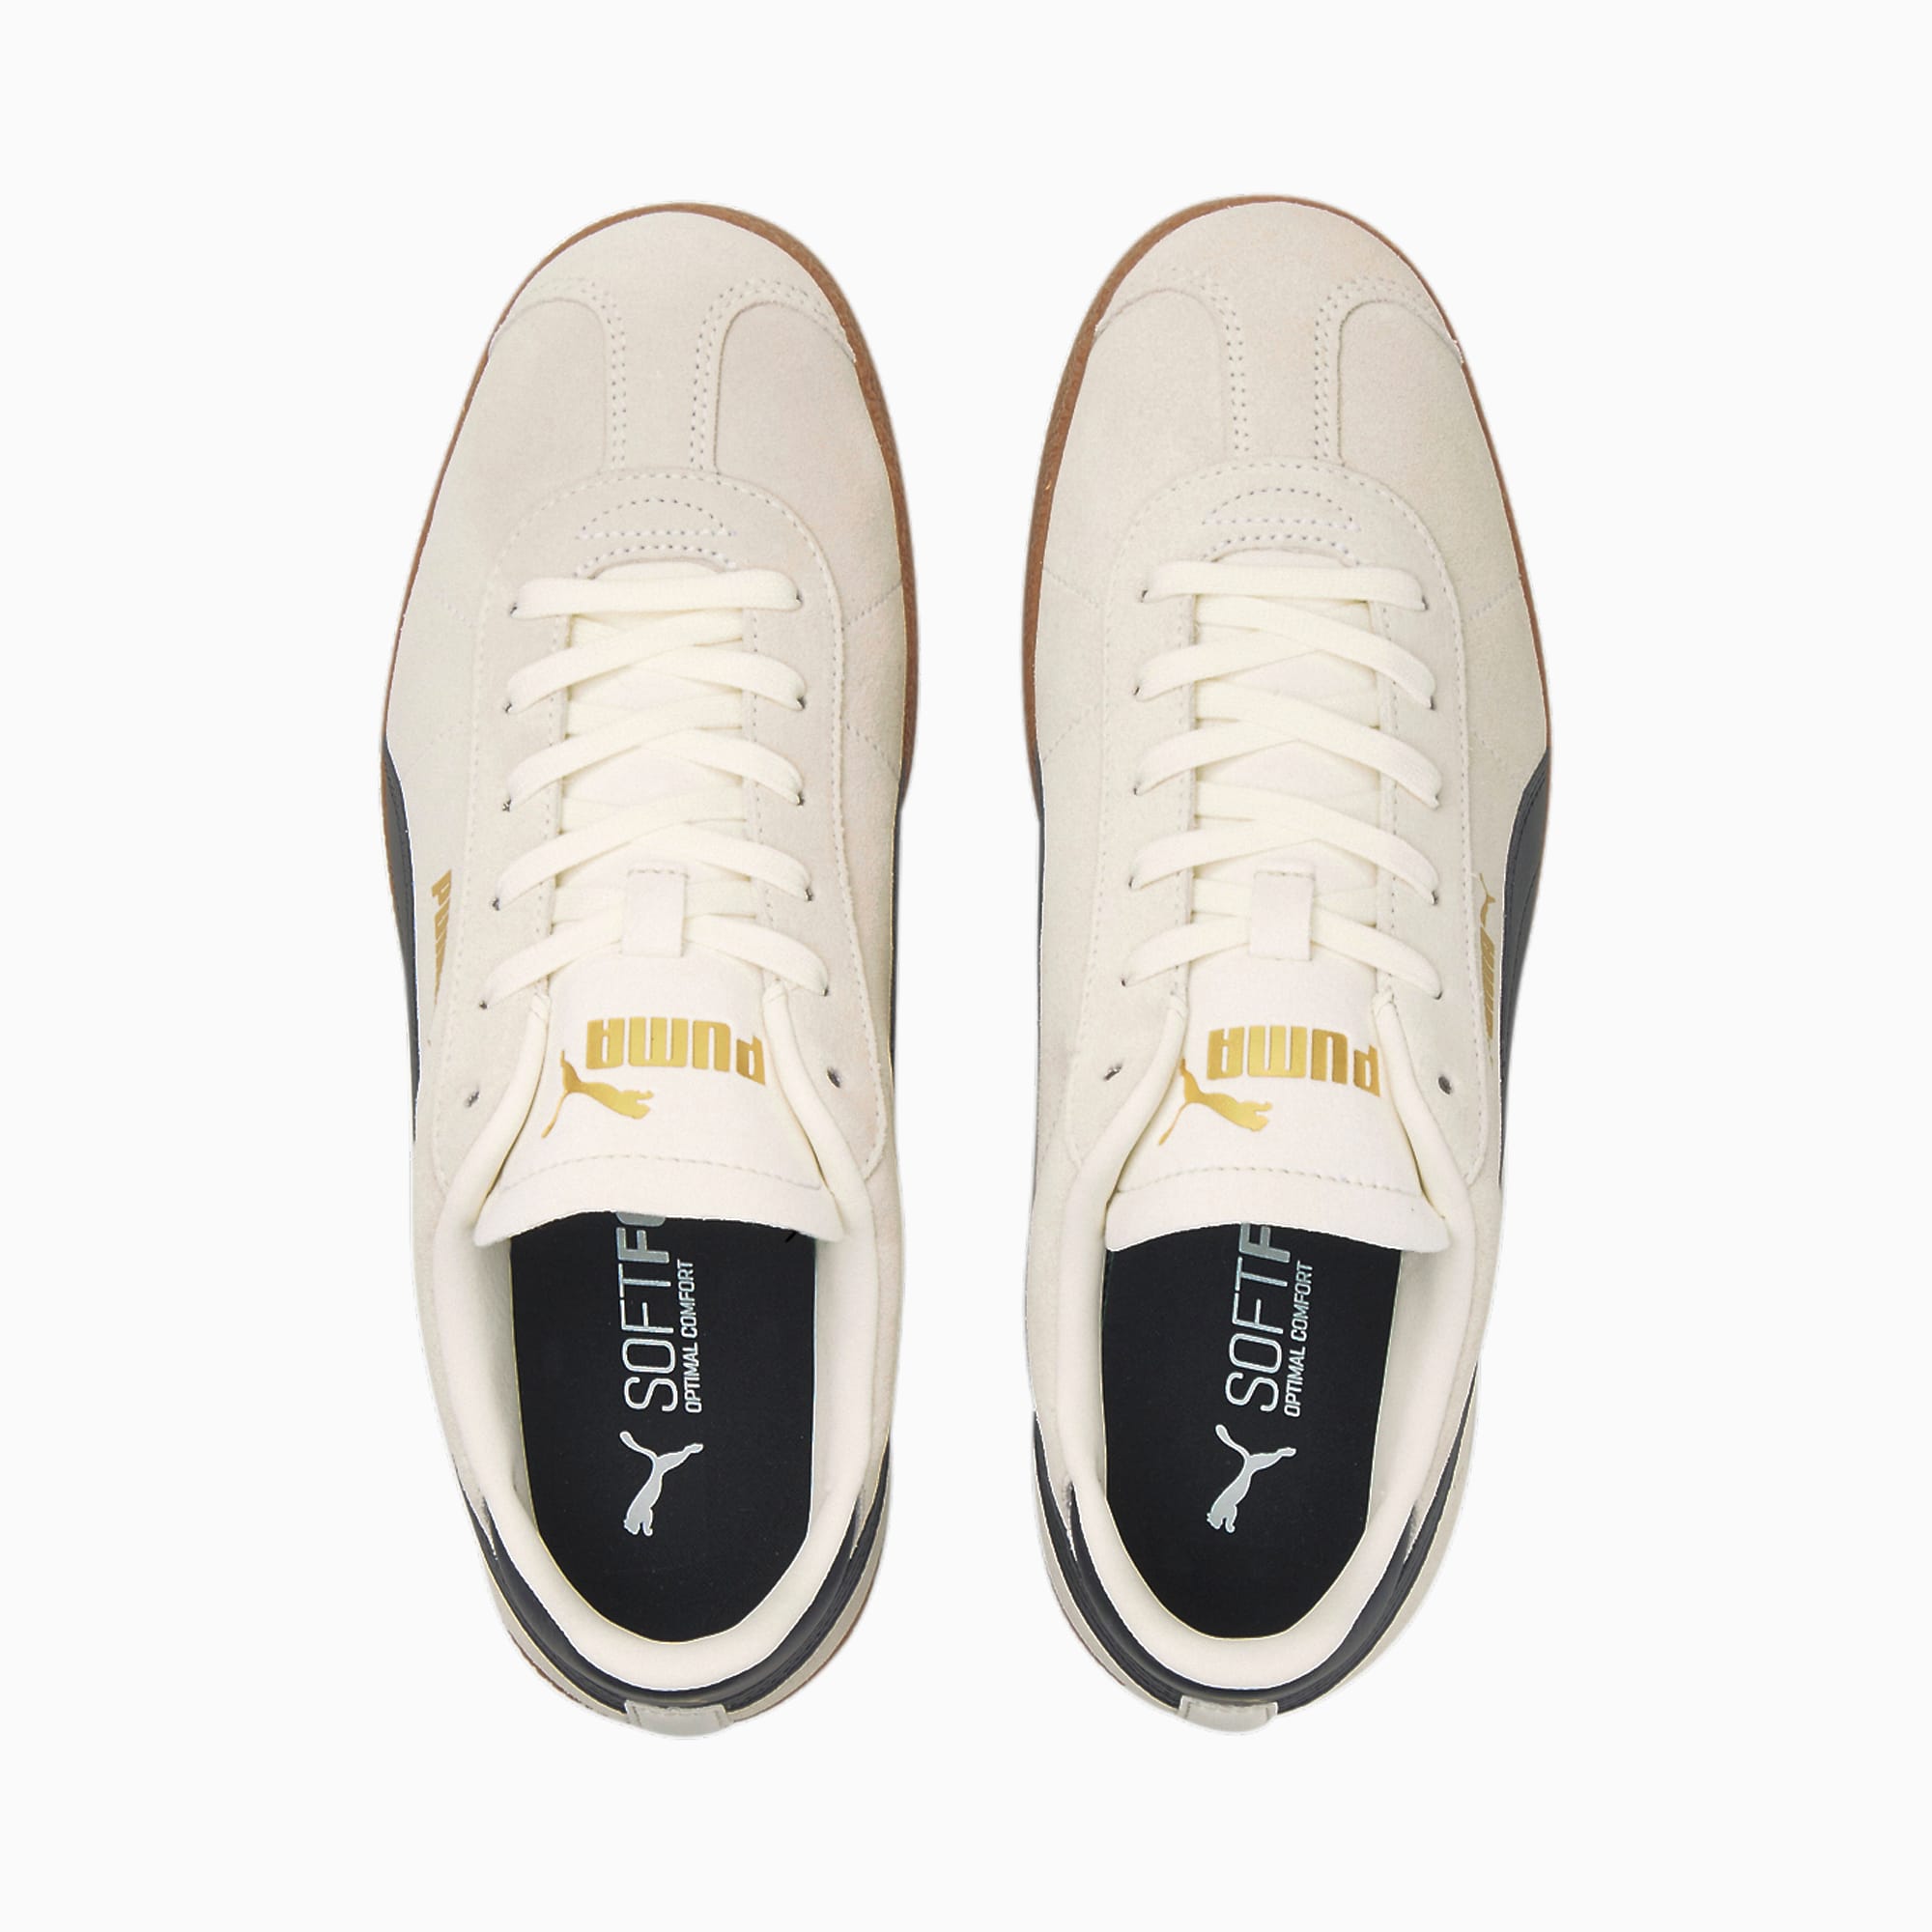 Men's PUMA Club Trainers, Marshmallow/Black/Gold, Size 35,5, Shoes